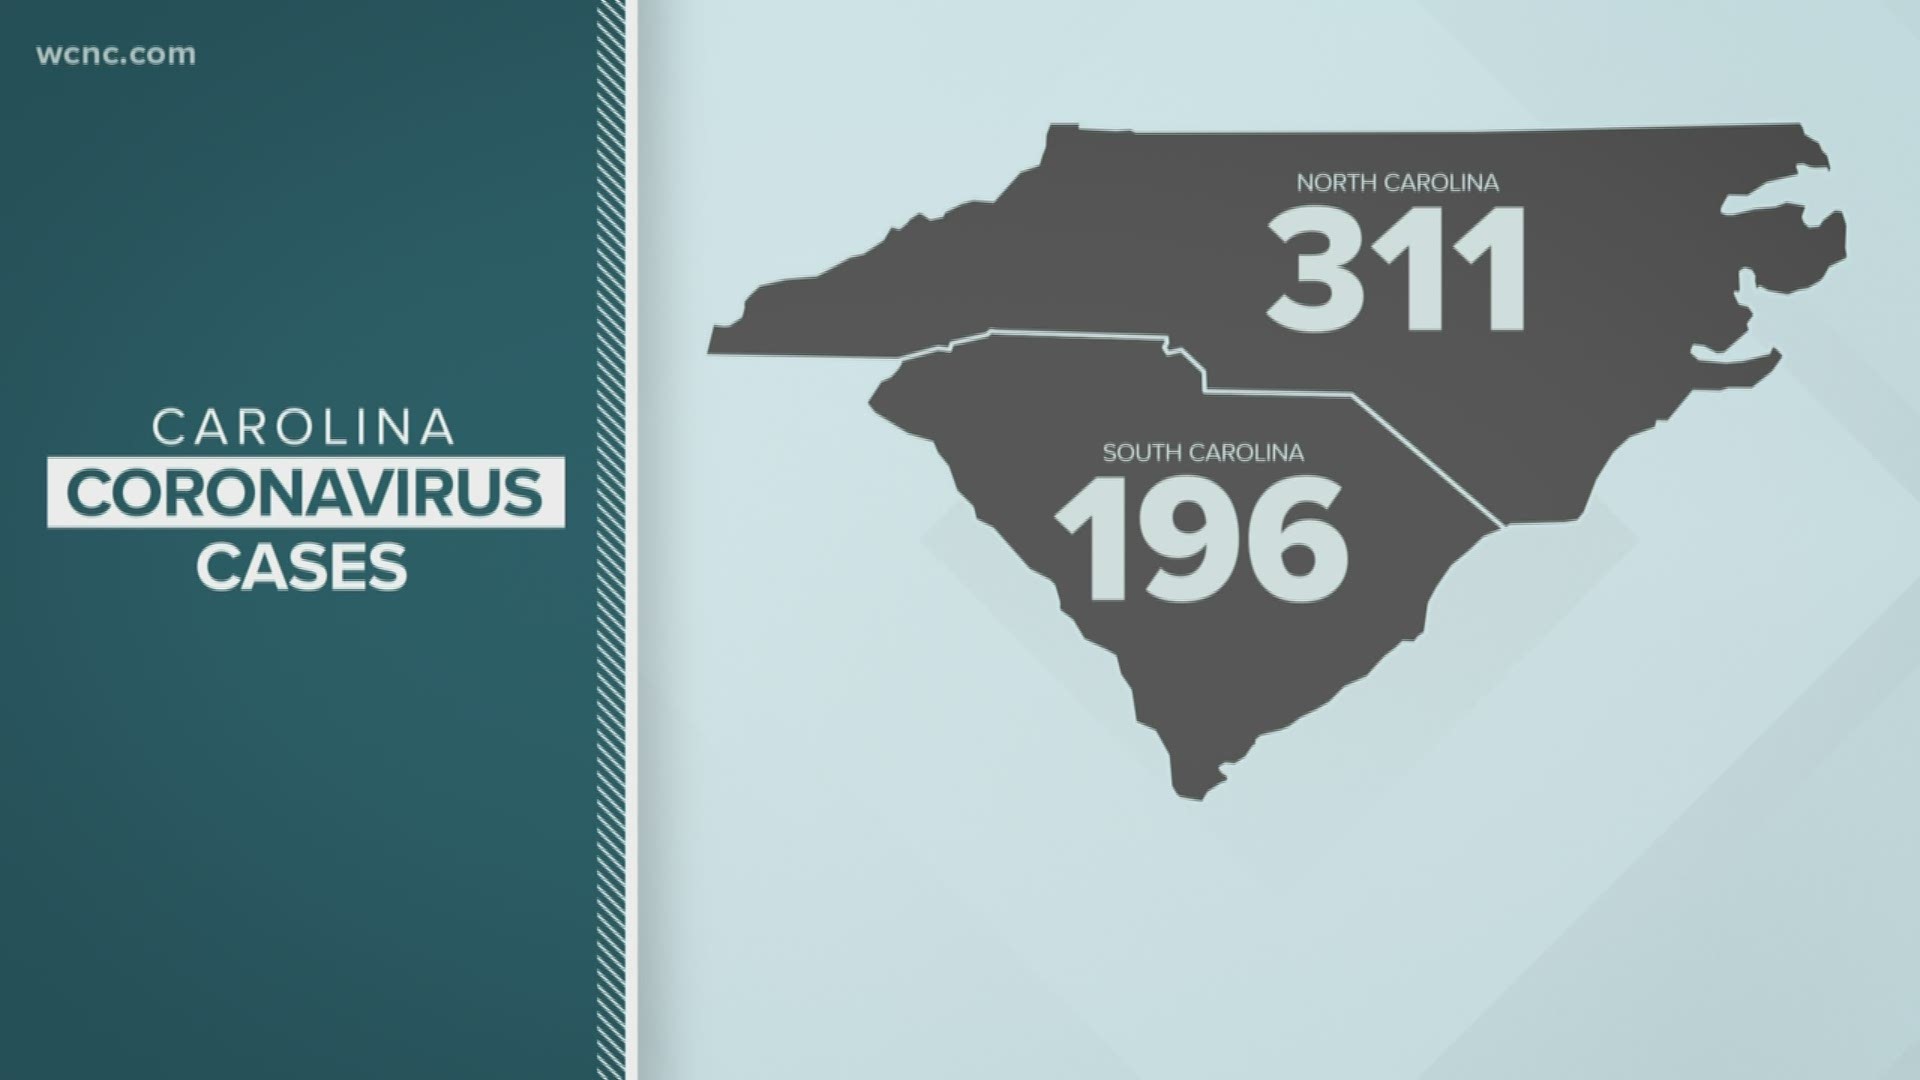 Health officials in Mecklenburg County reported 17 new positive cases of coronavirus Monday, bringing the countywide total to nearly 100.